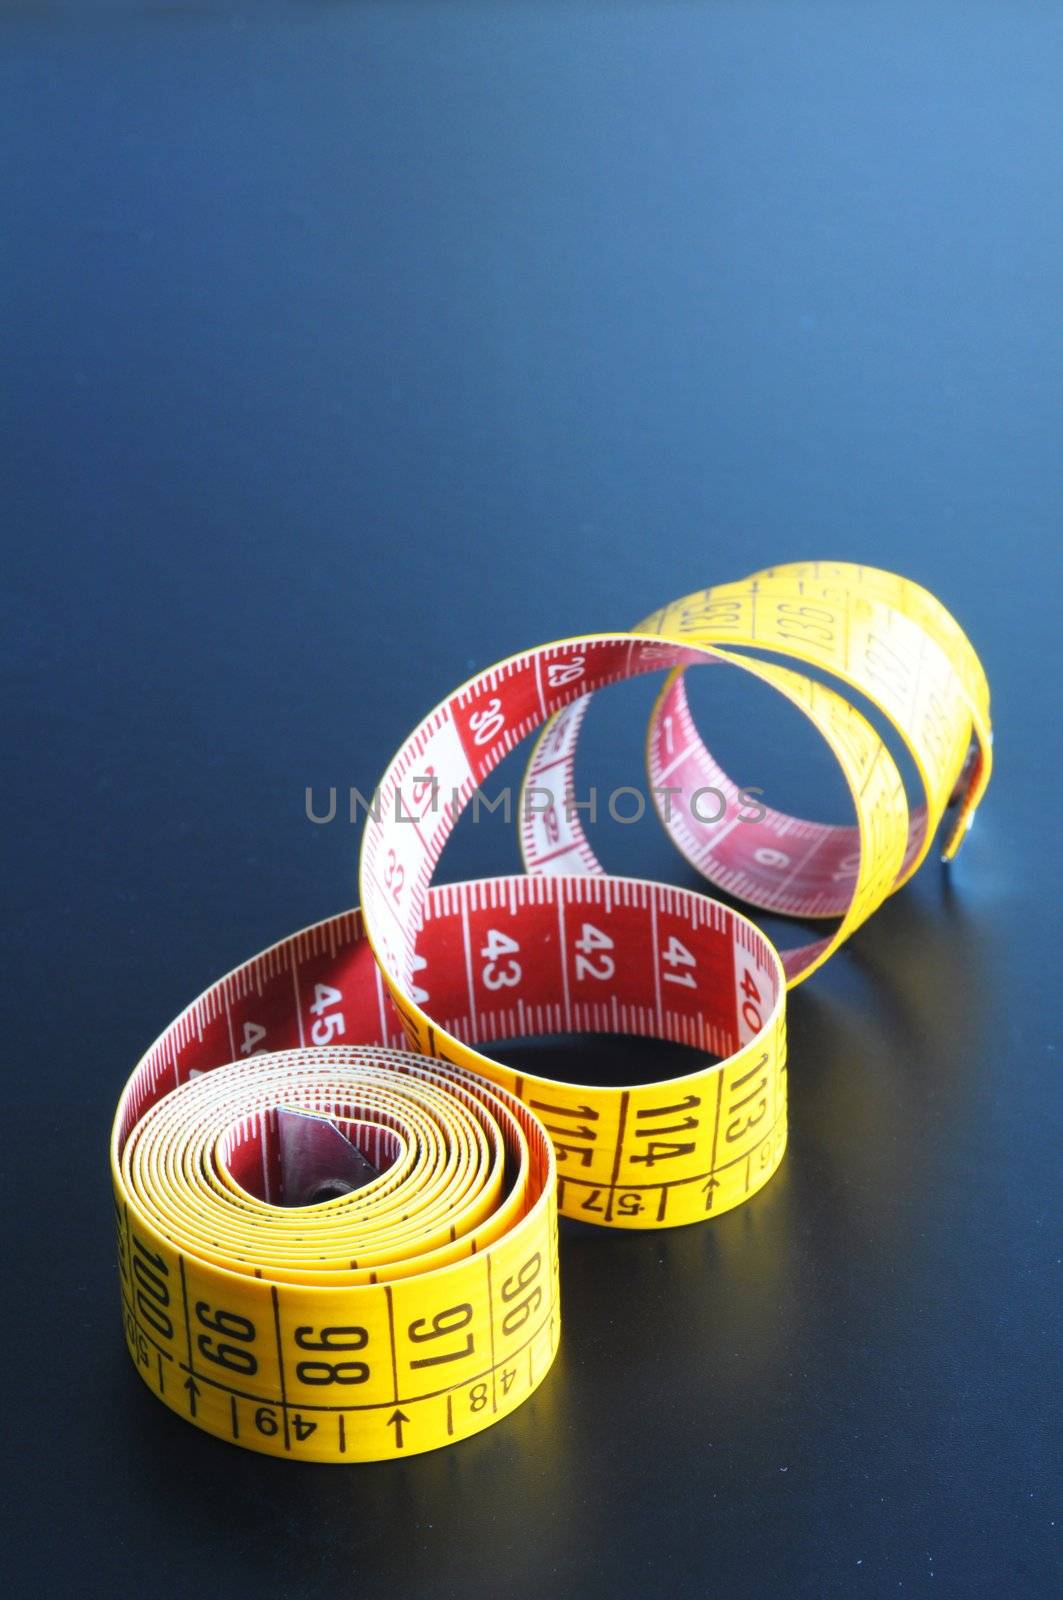 measuring tape showing diet or taylor concept